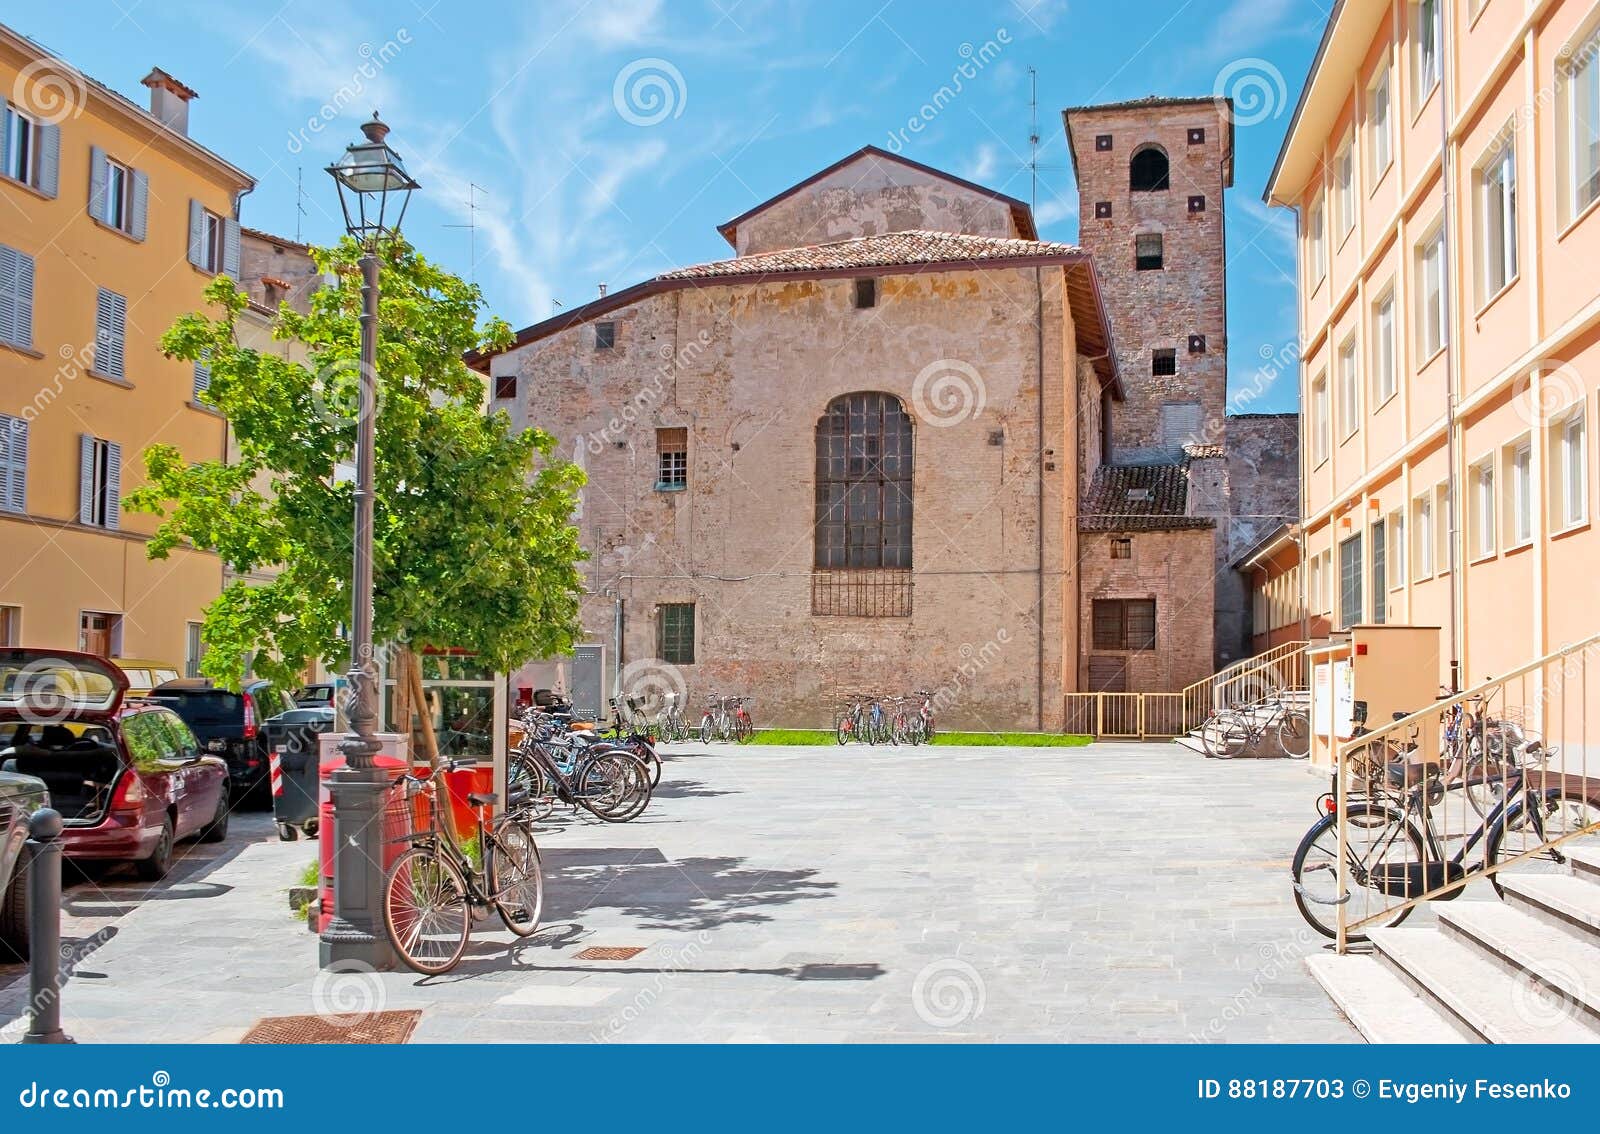 the medieval churches in parma